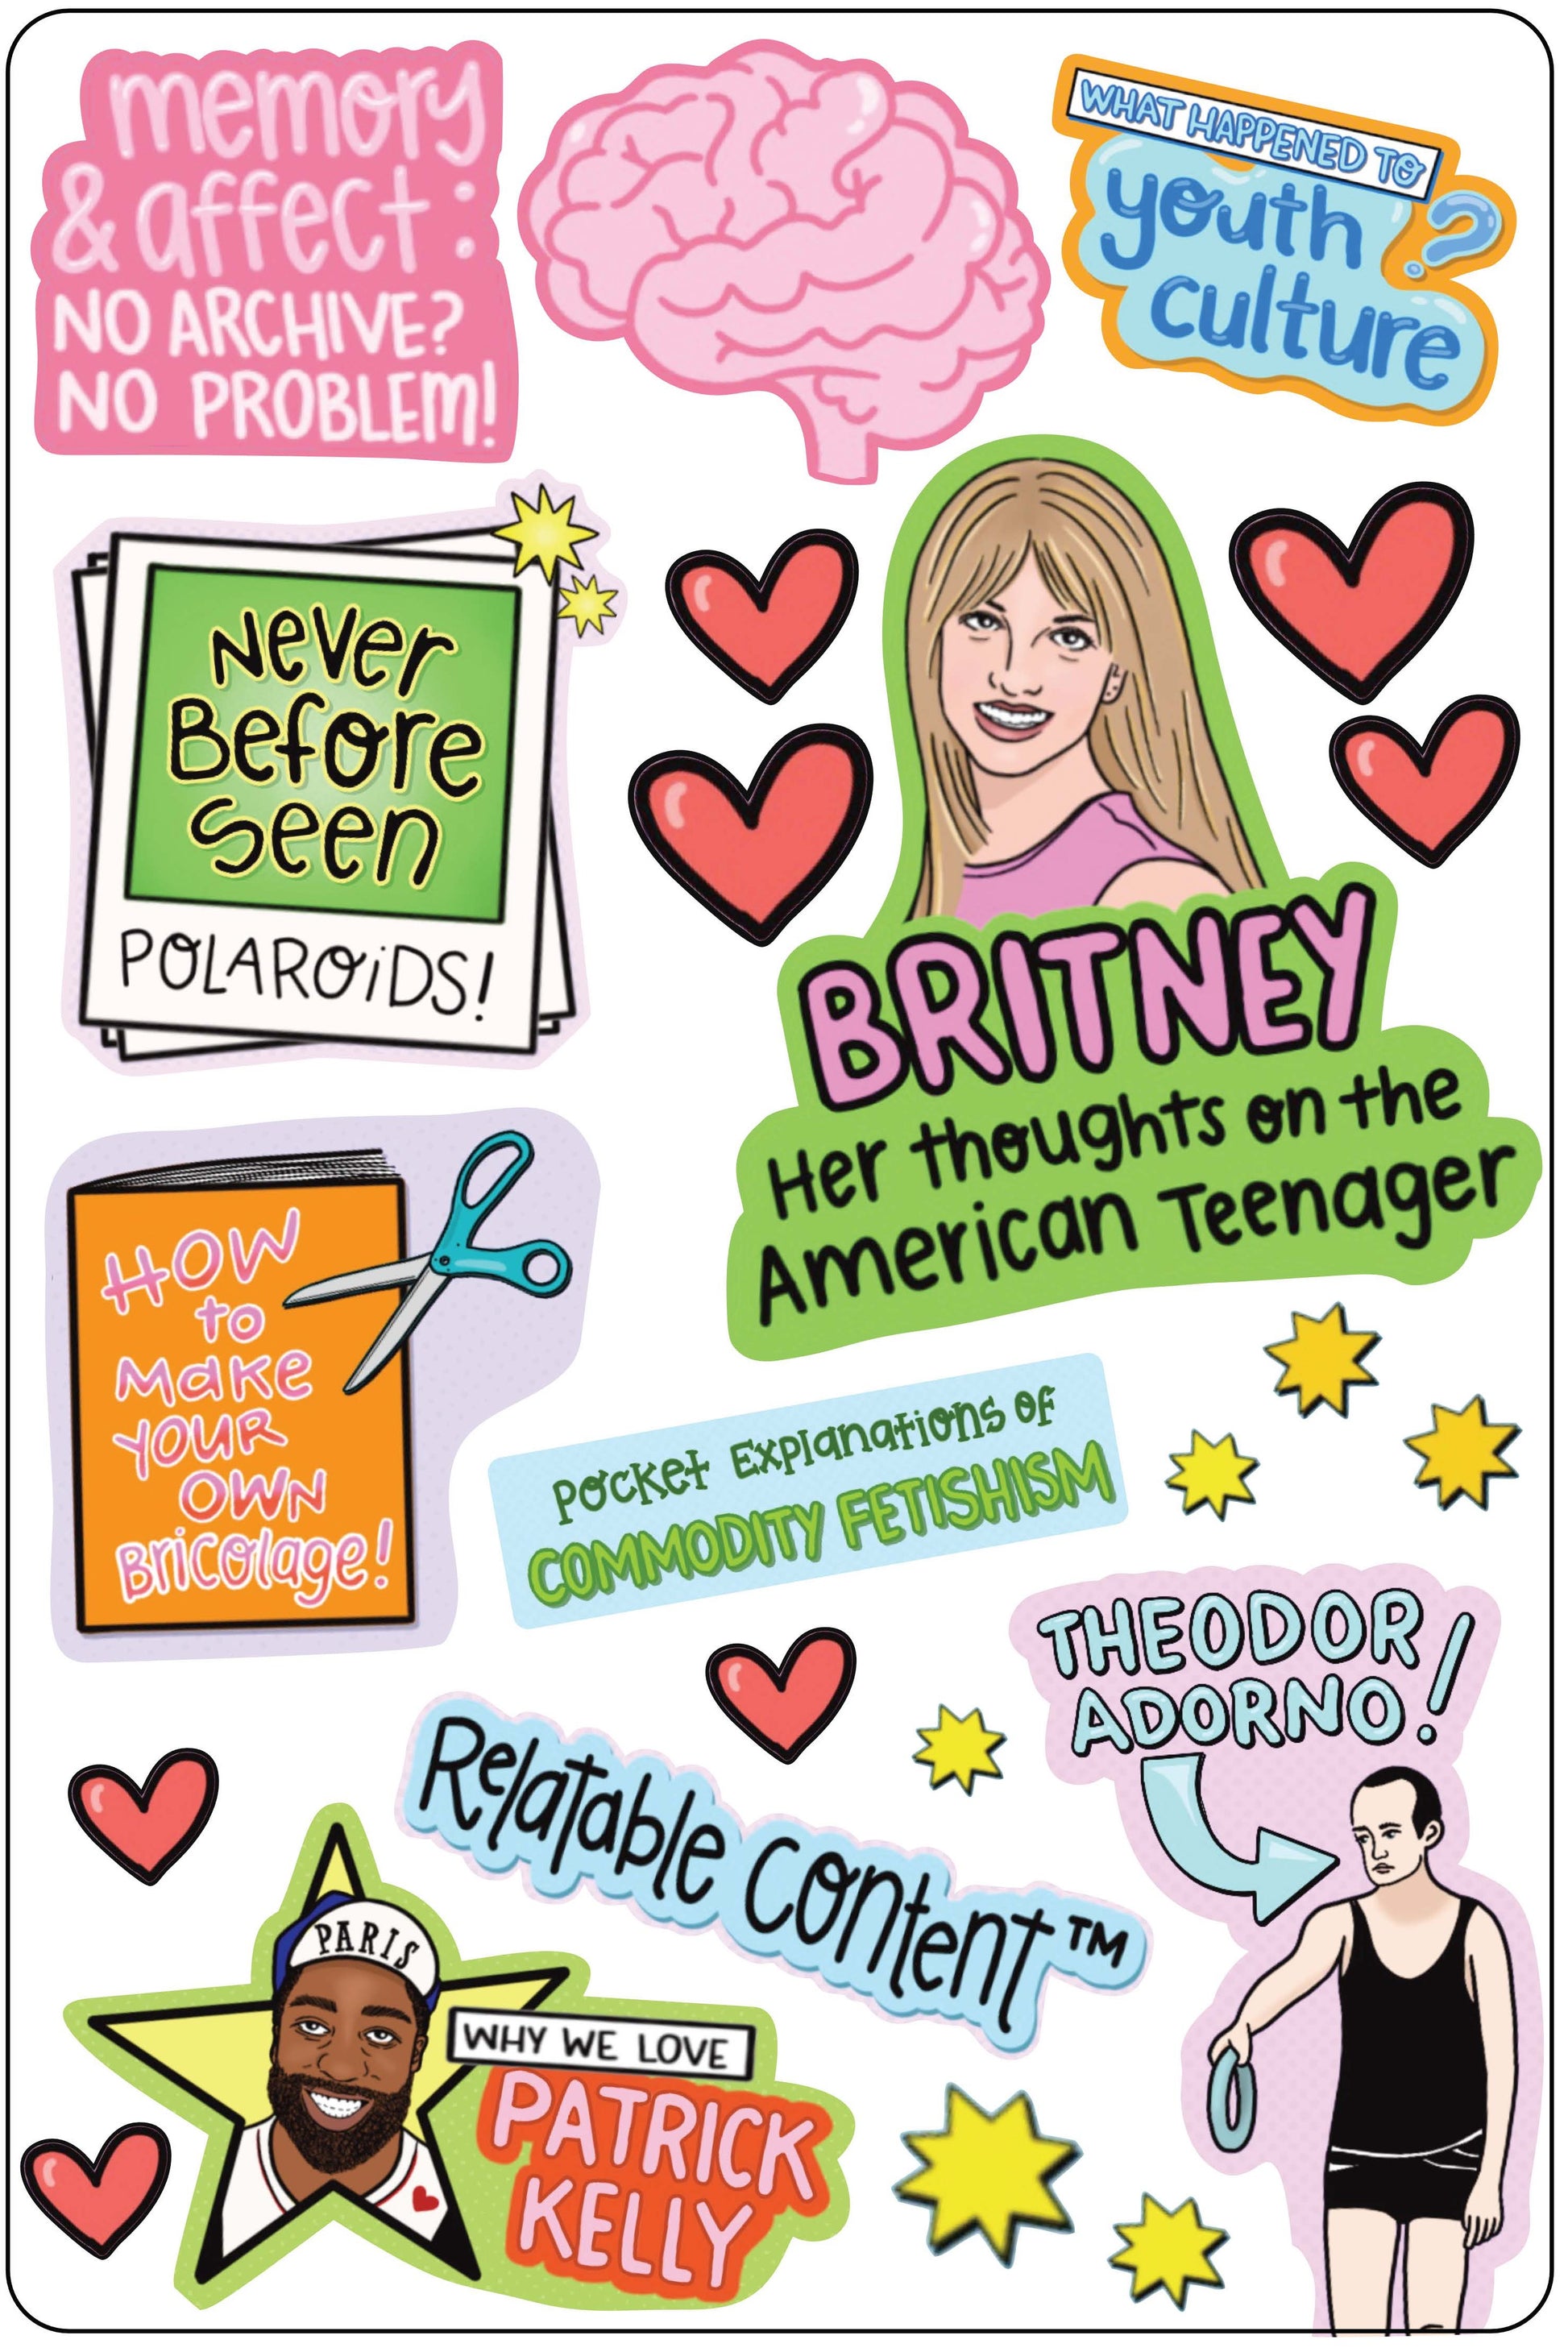 A brightly colored sticker sheets including illustrations of Britney Spears, Patrick Kelly, and other designs in the aesthetic of Tiger Beat magazine.